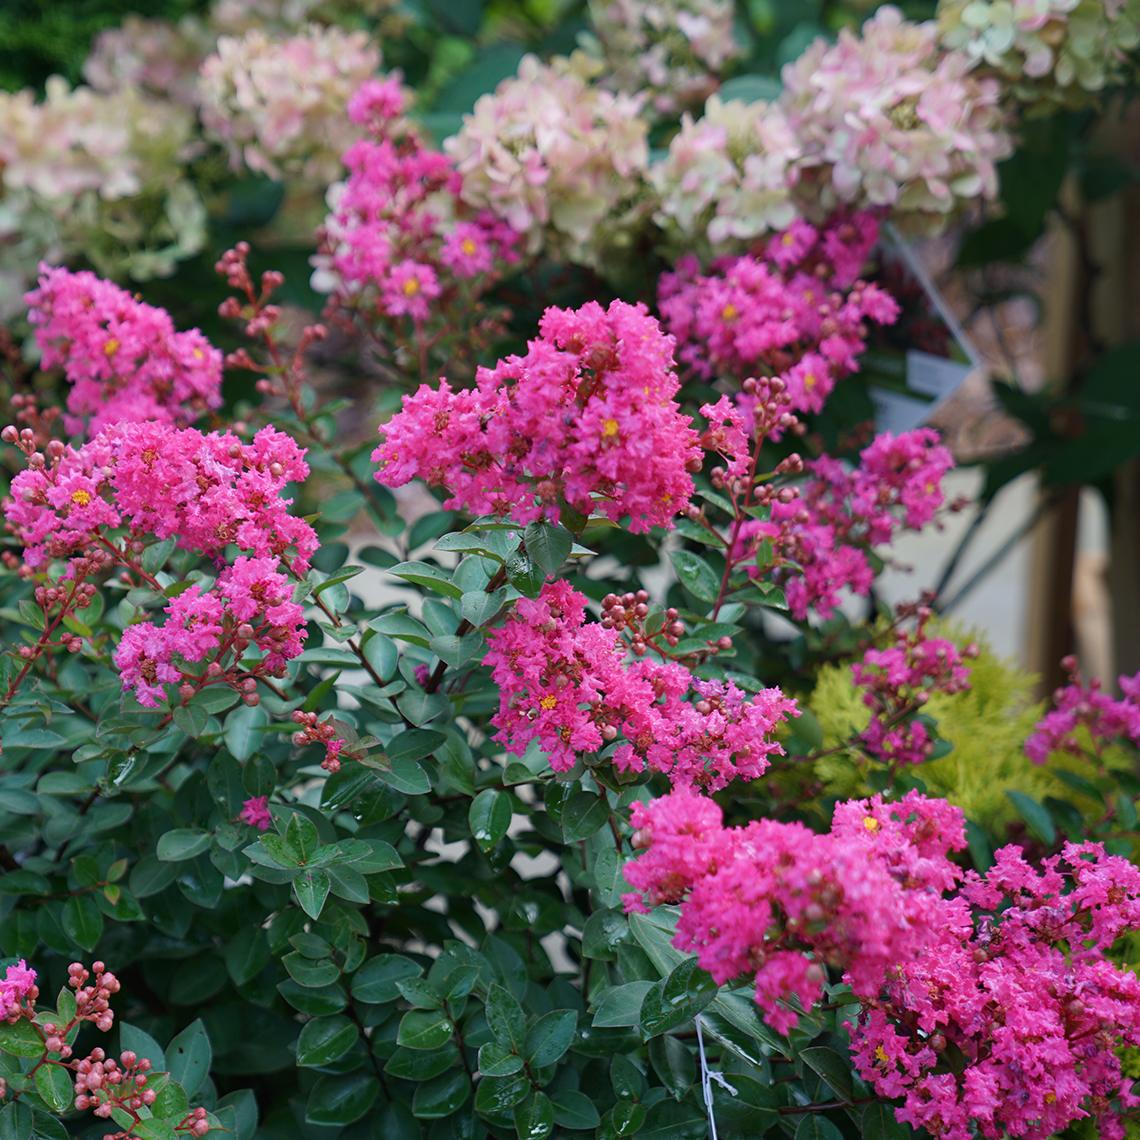 Infinitini Brite Pink Lagerstroemia vibrant pink blooms